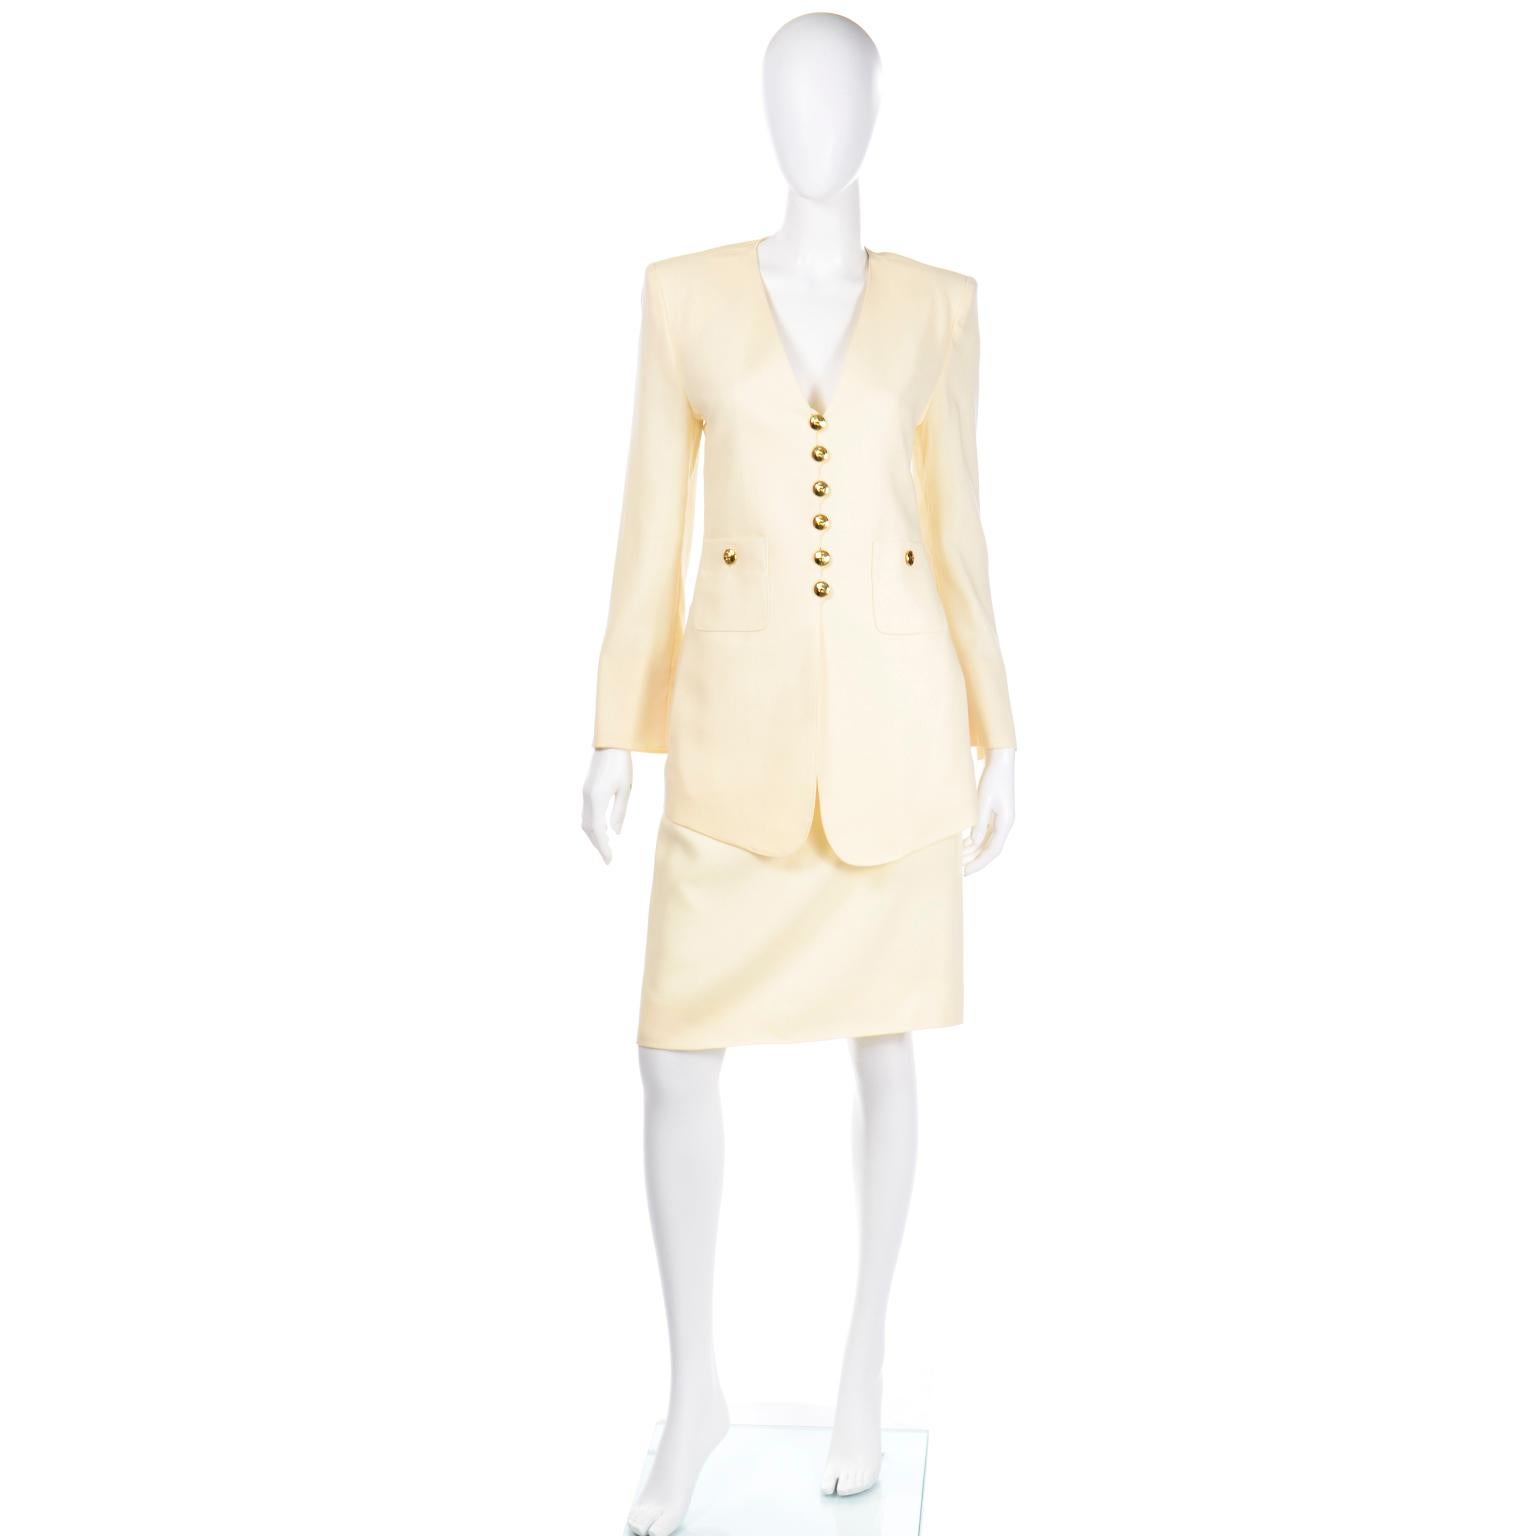 This is such an elegant, beautifully made vintage creamy ivory wool jacket & skirt suit designed by Sonia Rykiel. If you have never owned a Sonia Rykiel garment, you will become an instant fan once put one of her pieces on. Sonia Rykiel designed